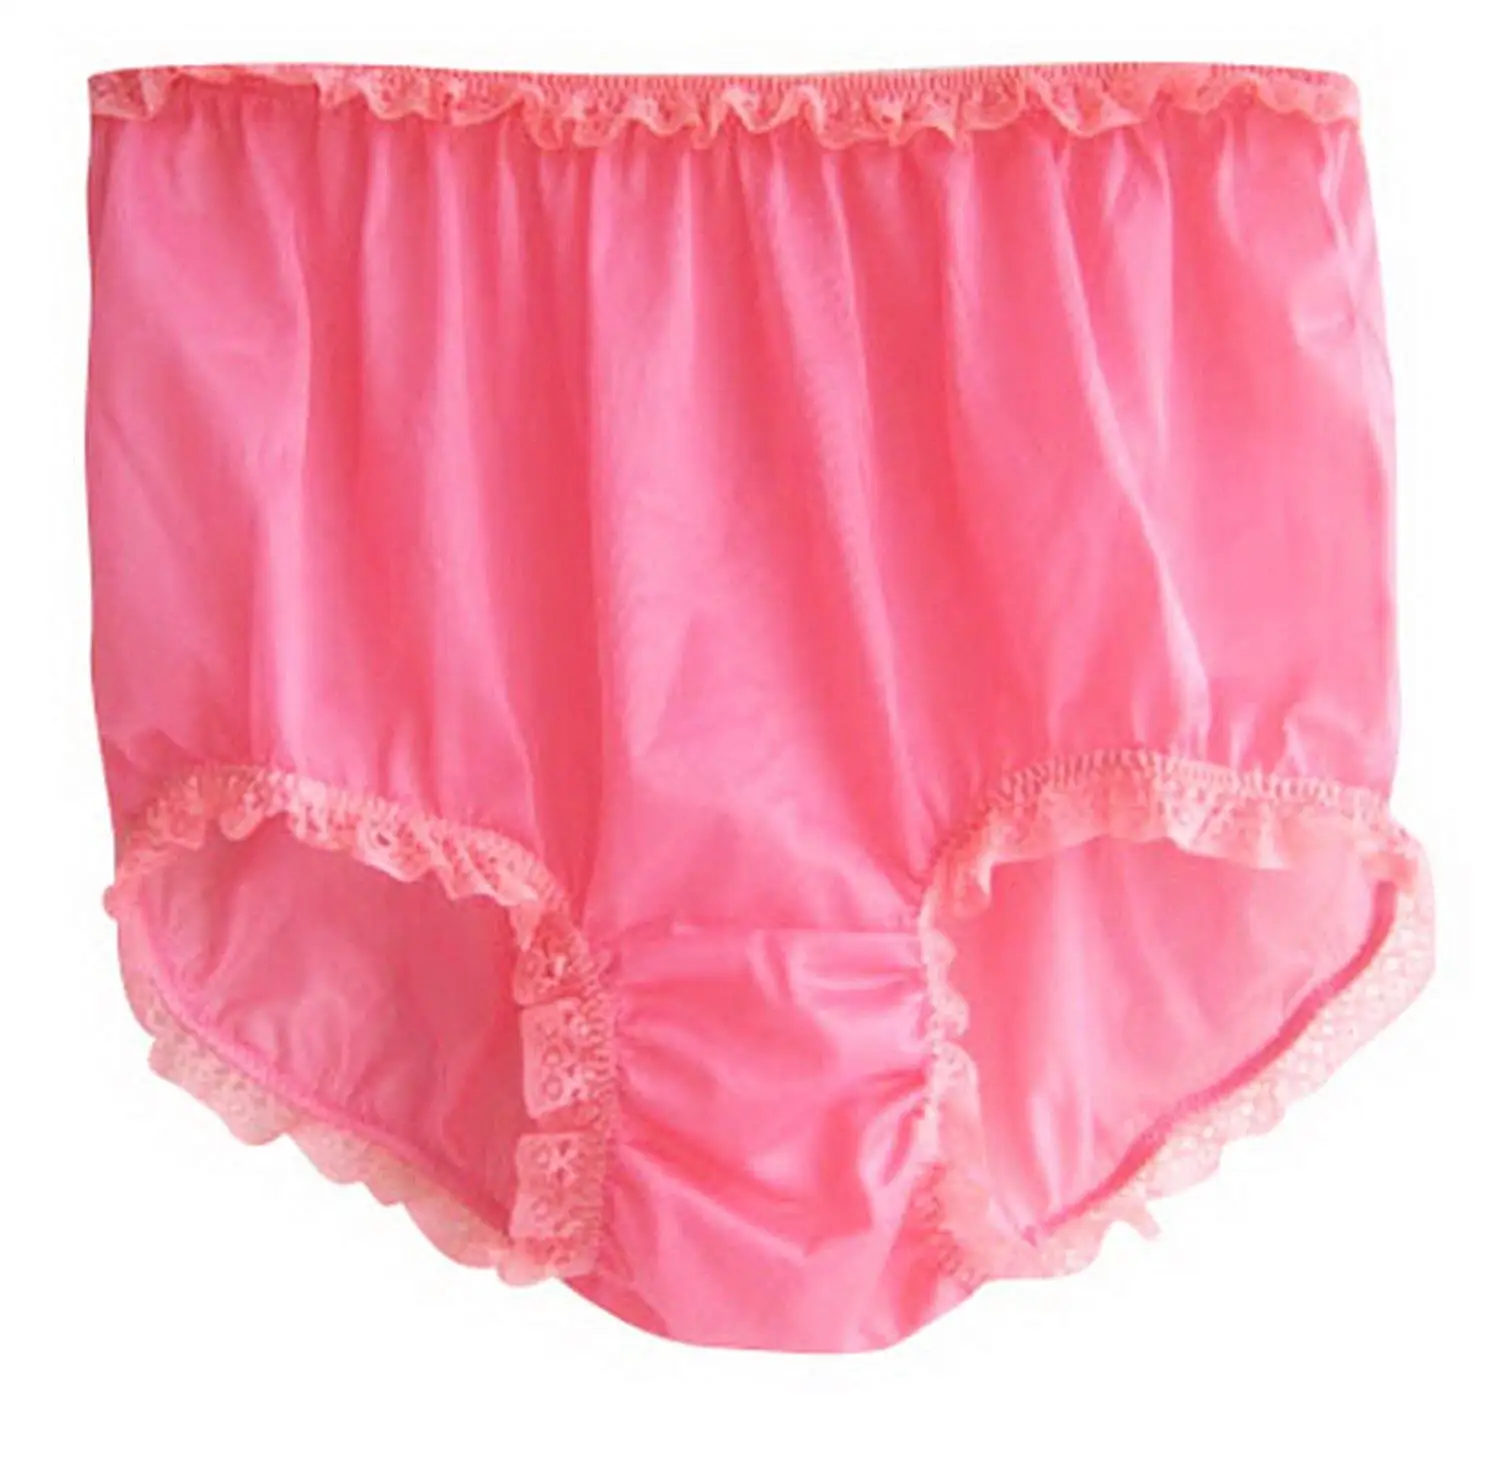 Cheap Pink Nylon Knickers Find Pink Nylon Knickers Deals On Line At